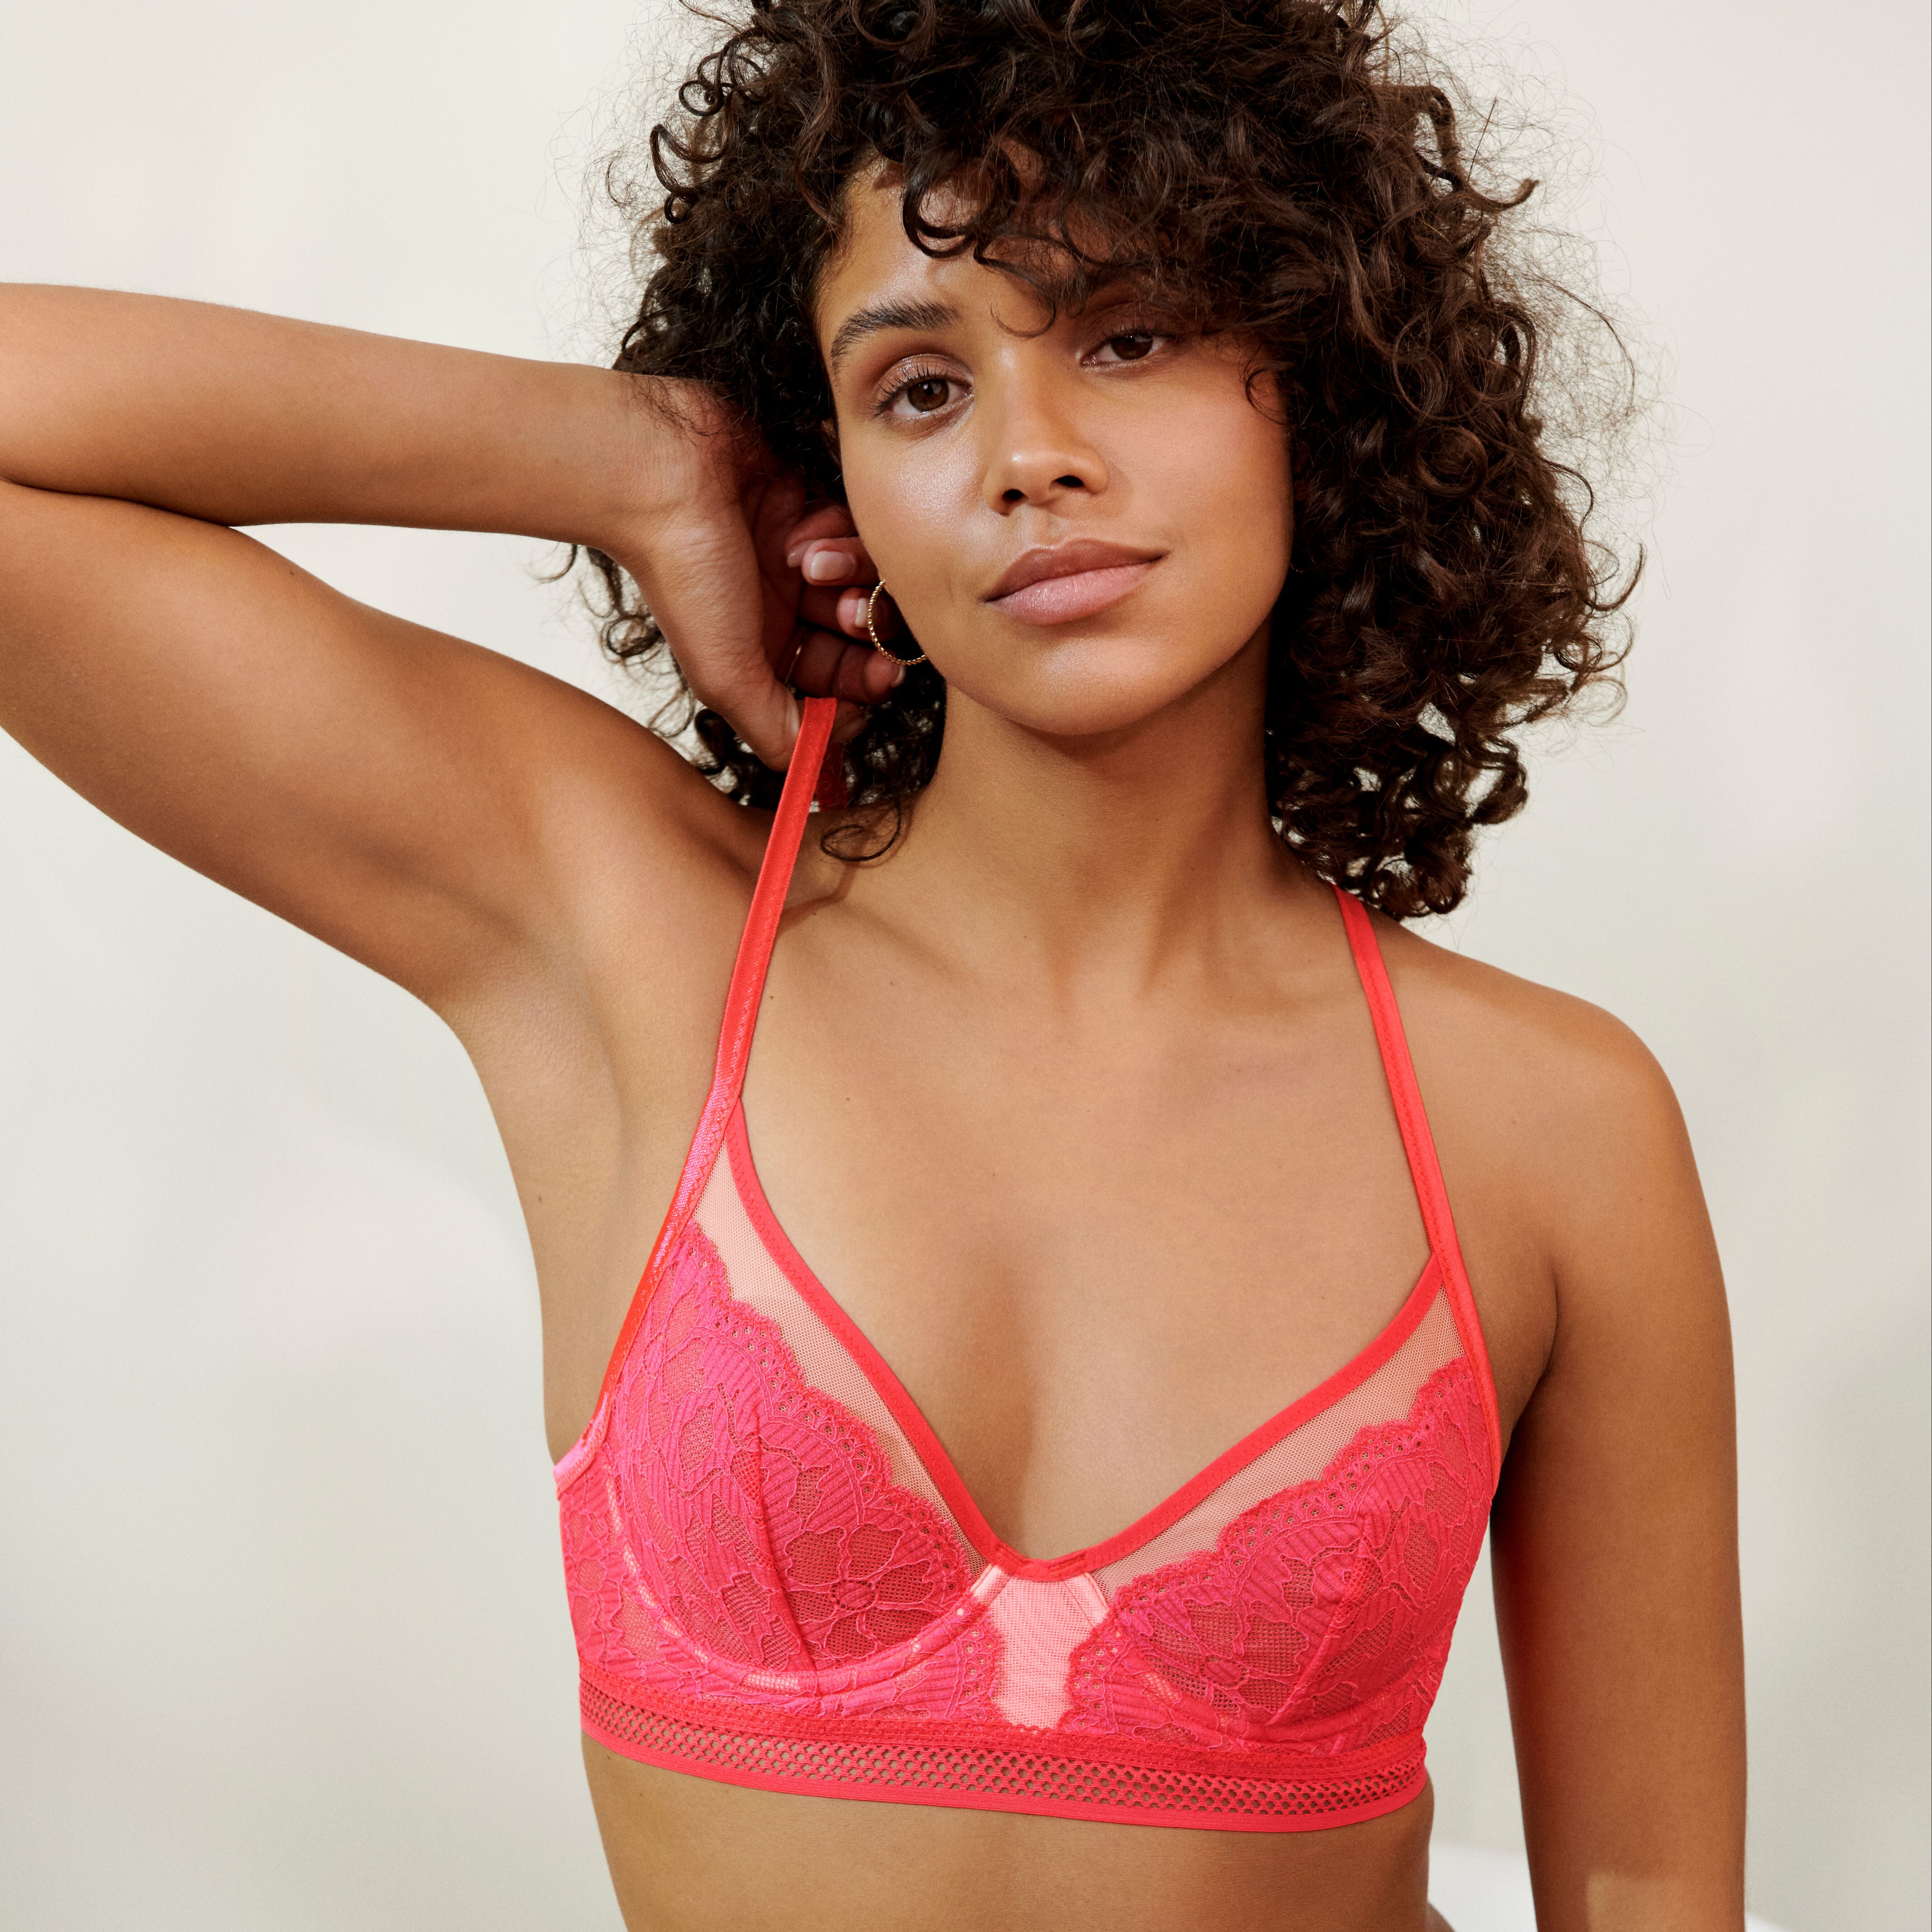 TOFO Women's Hot Pink Lace Bralette